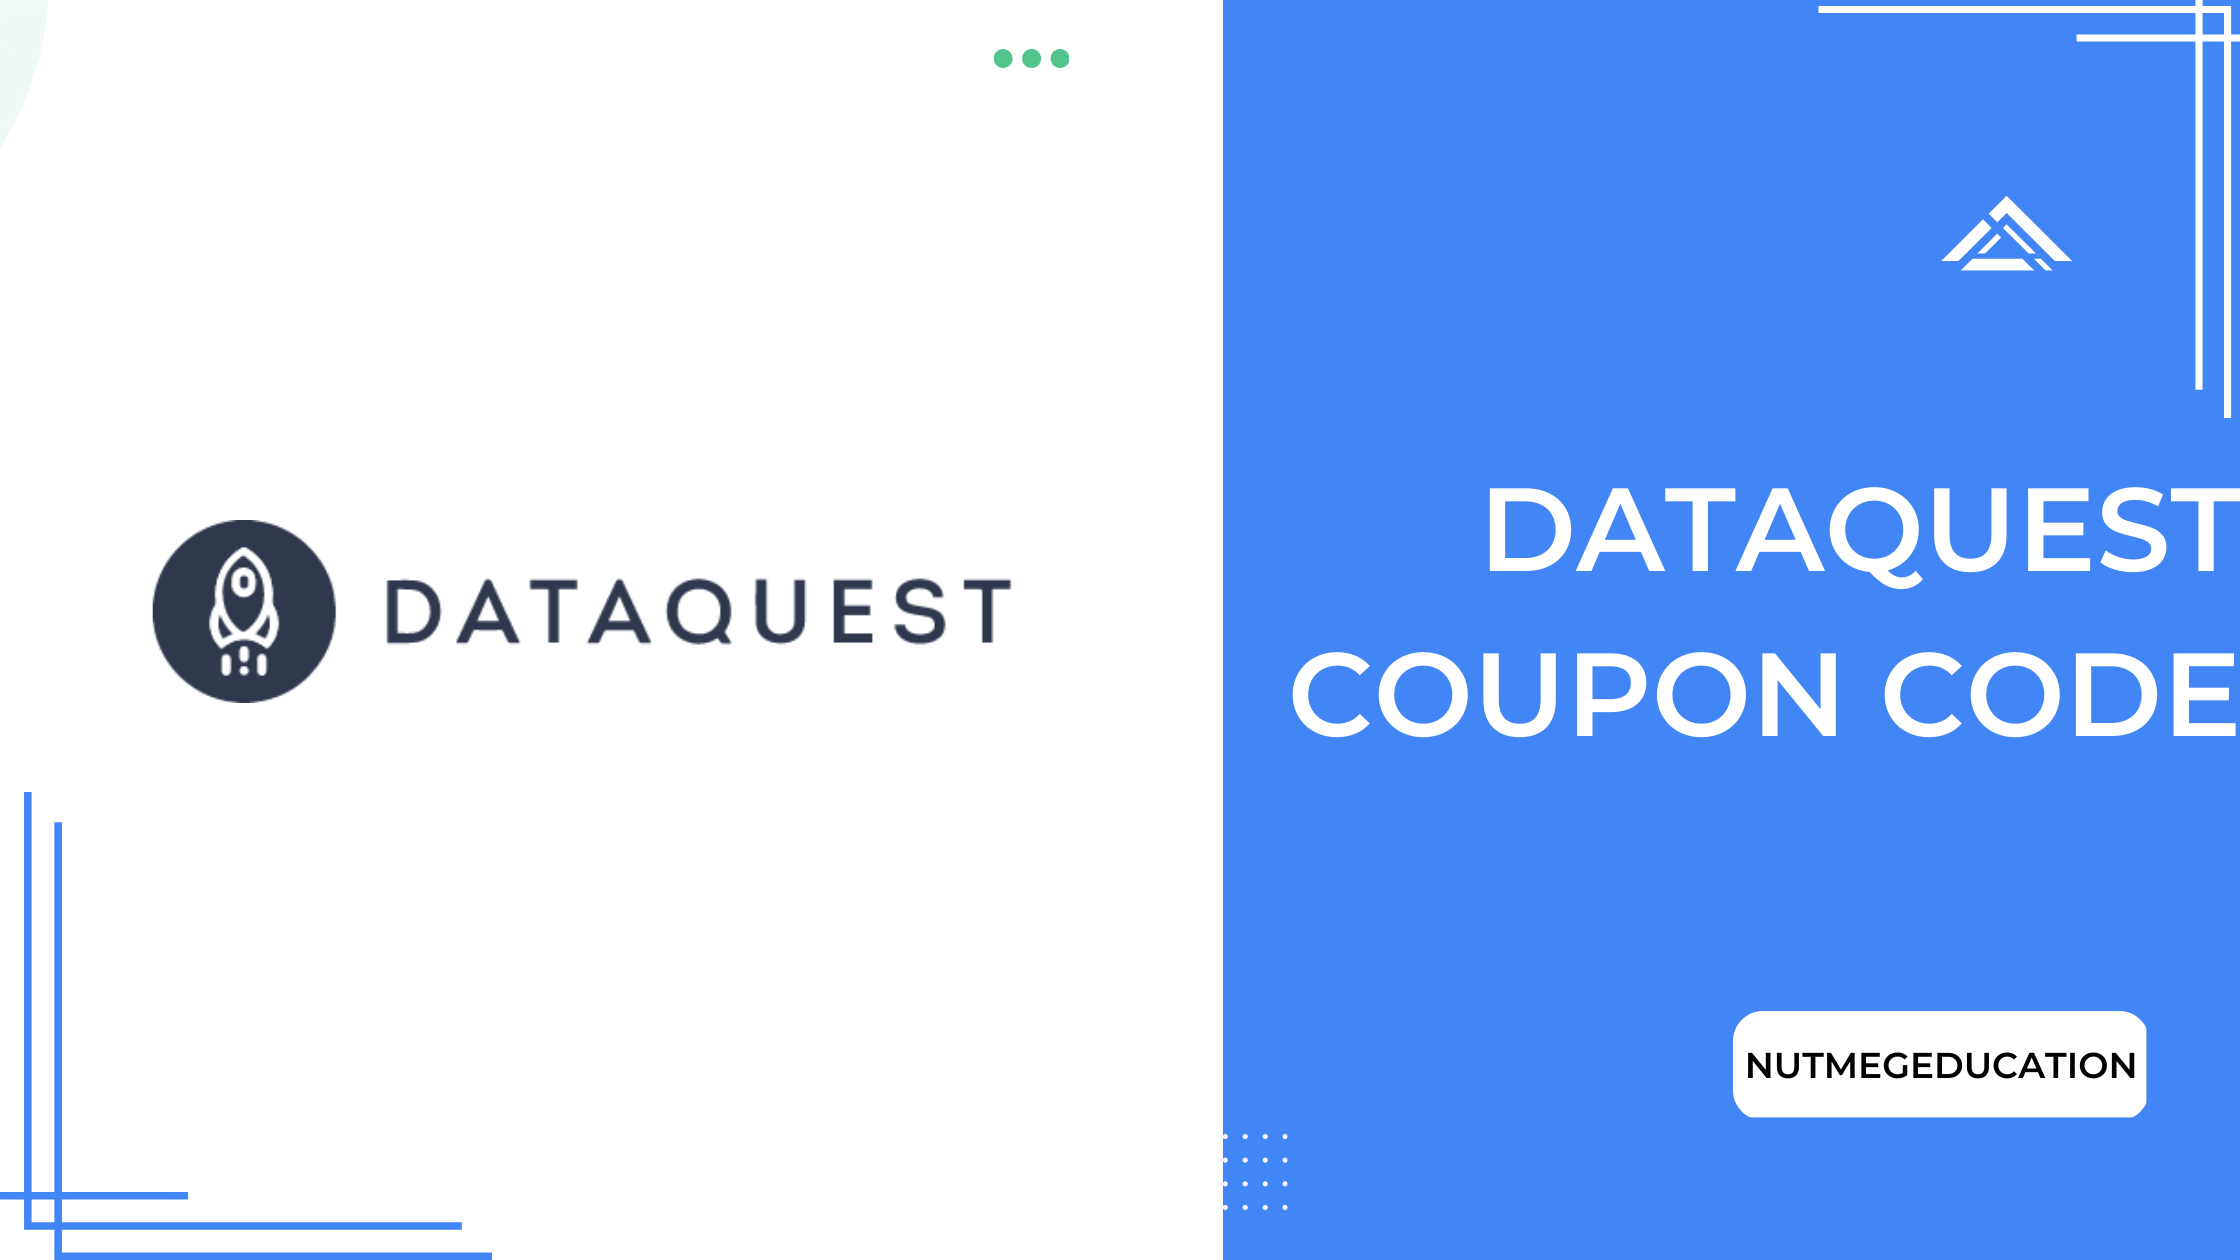 Dataquest Coupon Code - NutMegEducation